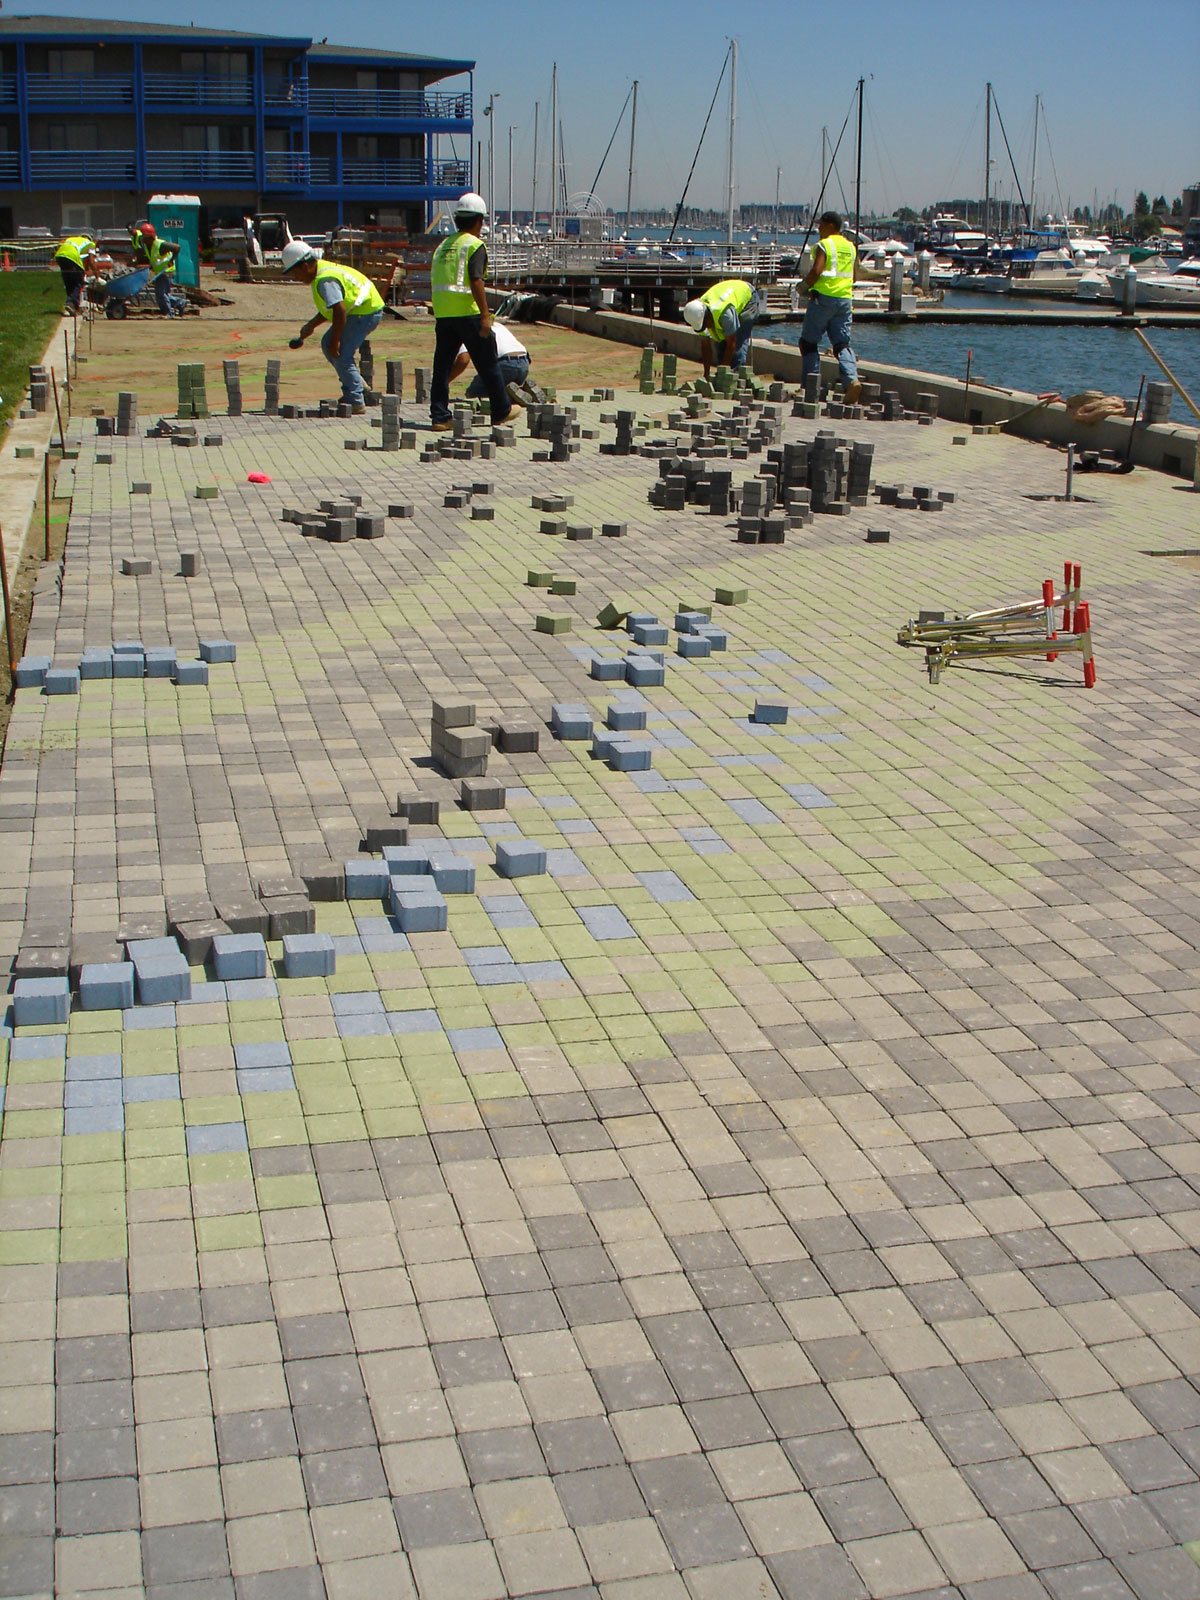 Paver project in process at Jack London Square